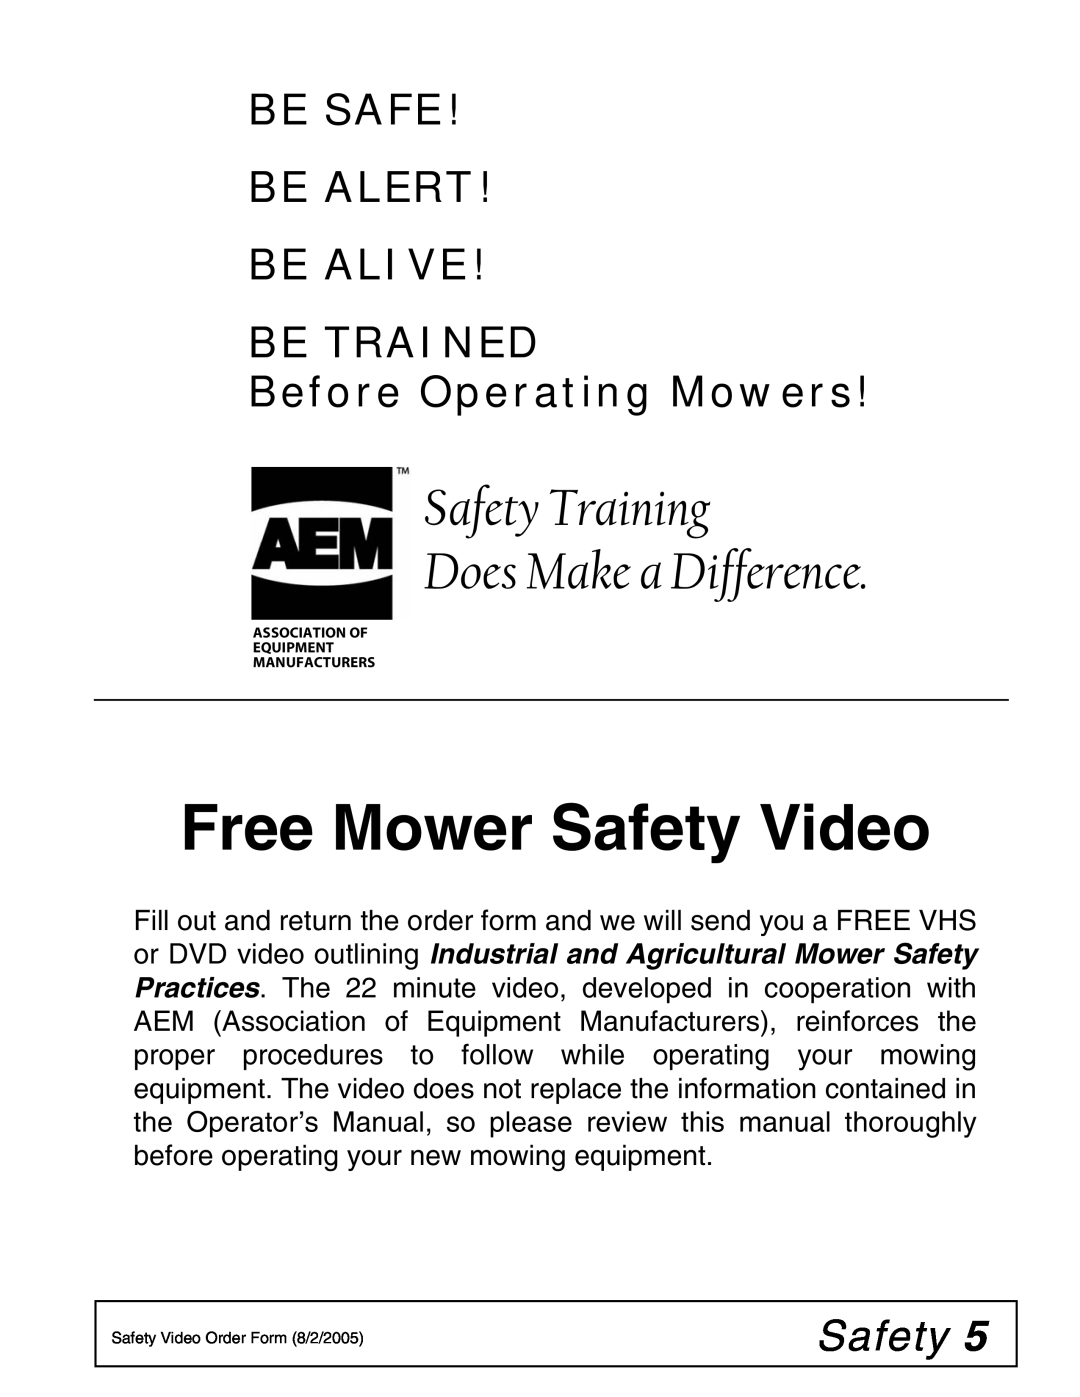 Woods Equipment BW126HBQ, BW180HBQ manual Free Mower Safety Video, Safety Training Does Make a Difference 